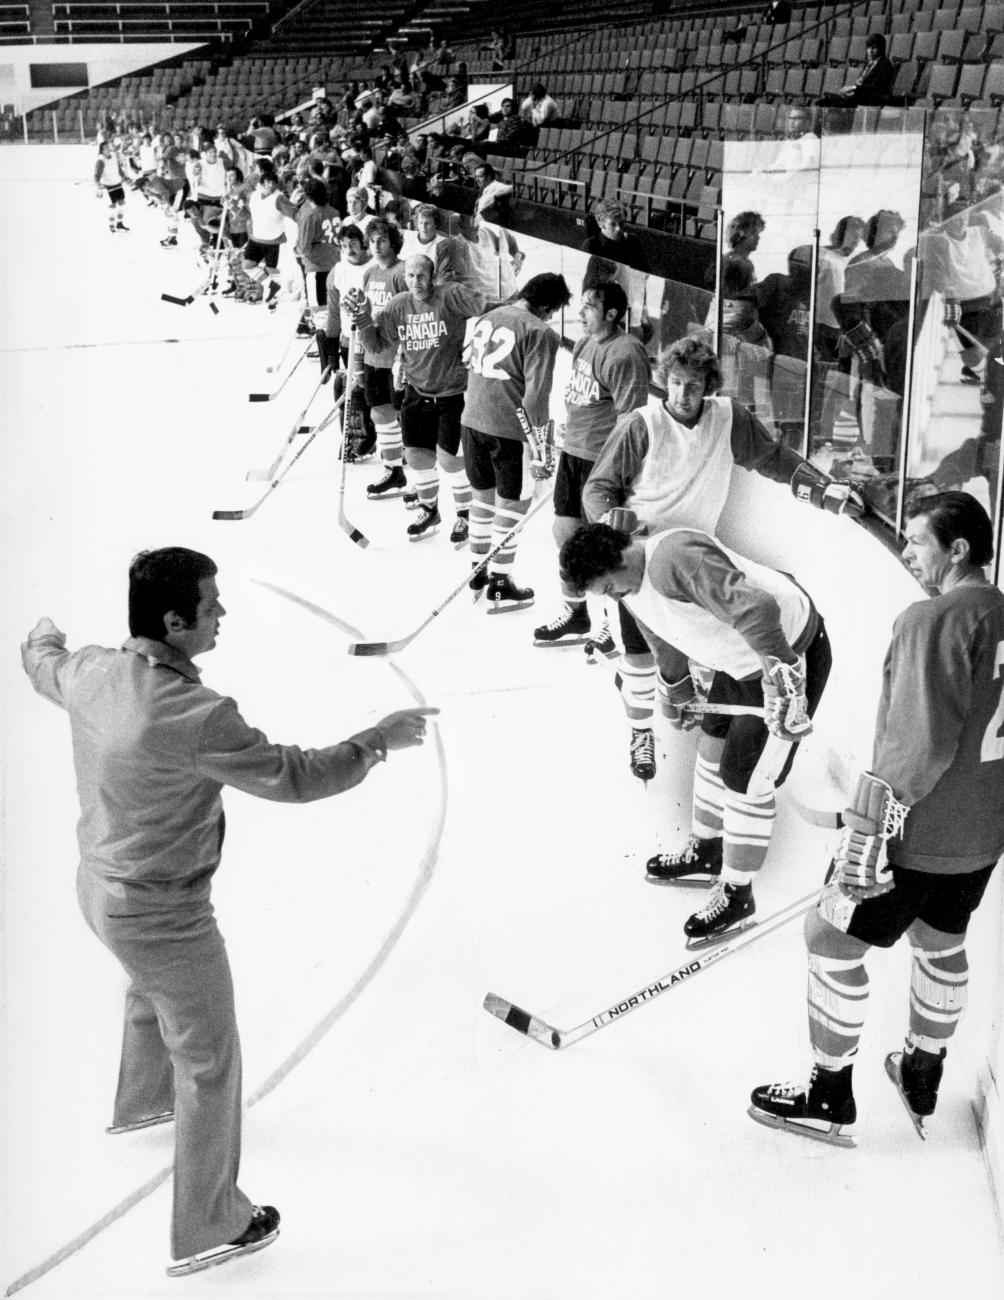 a line of hockey players along the edge of the rink with Stan Mikita talking to the coach in the foreground.